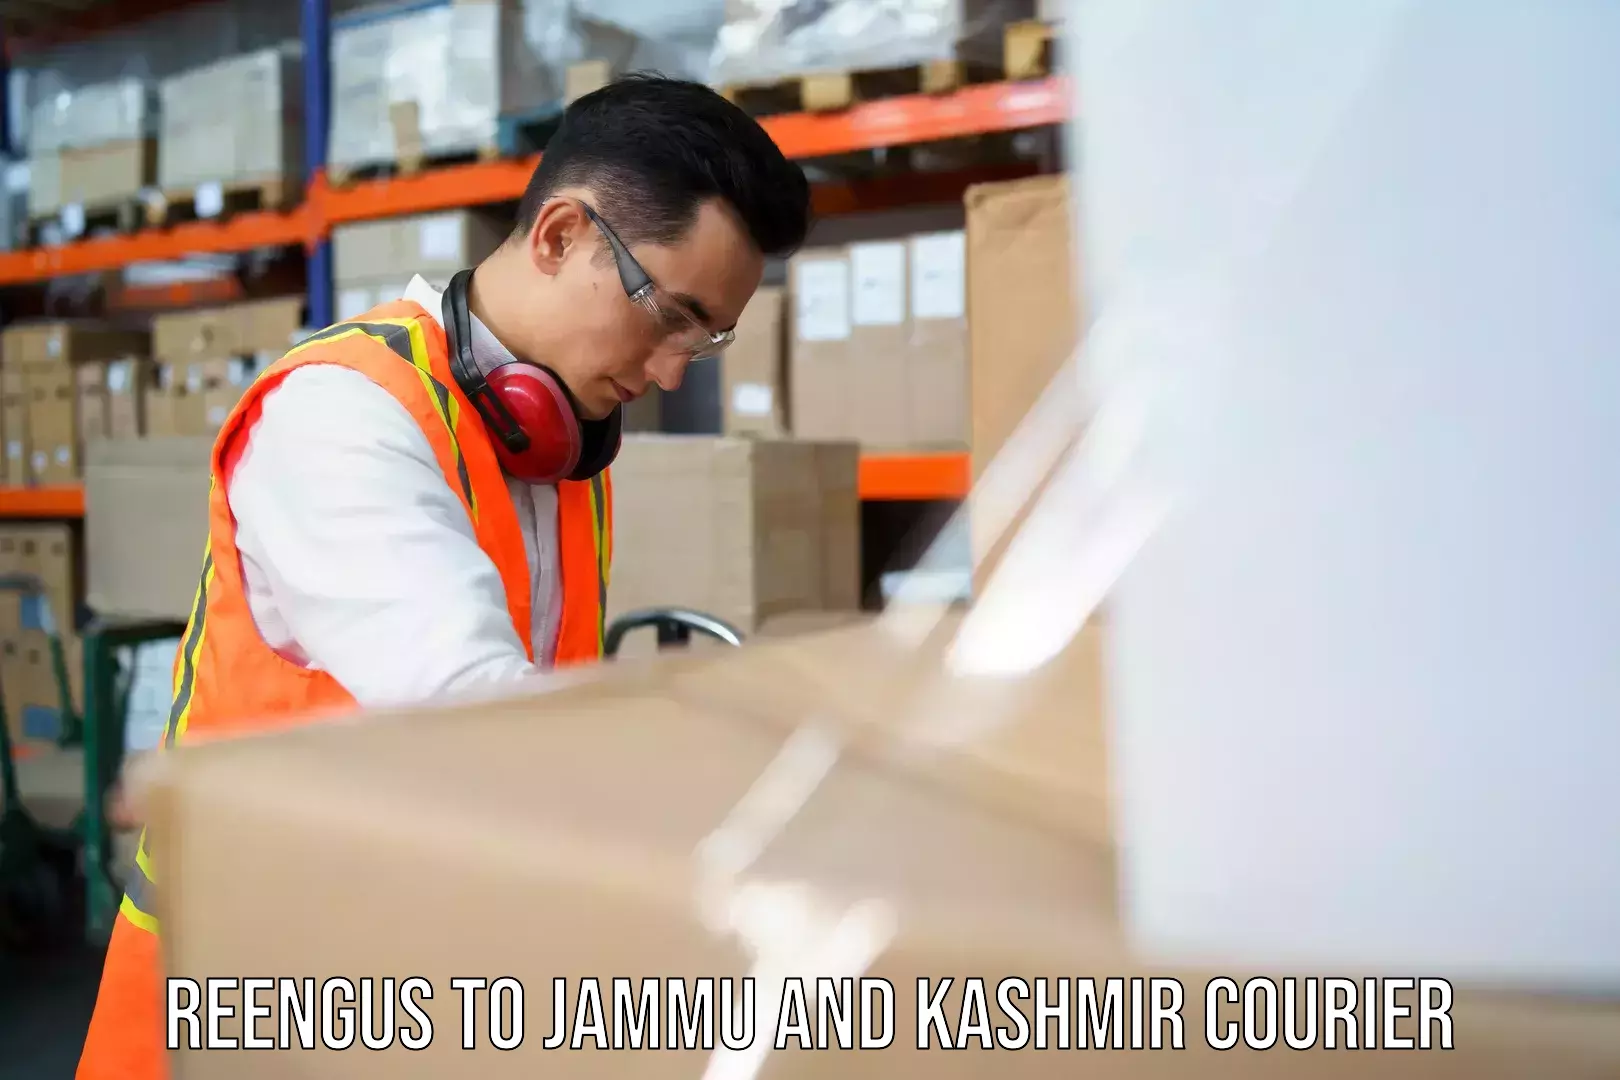 24-hour courier service Reengus to Jammu and Kashmir